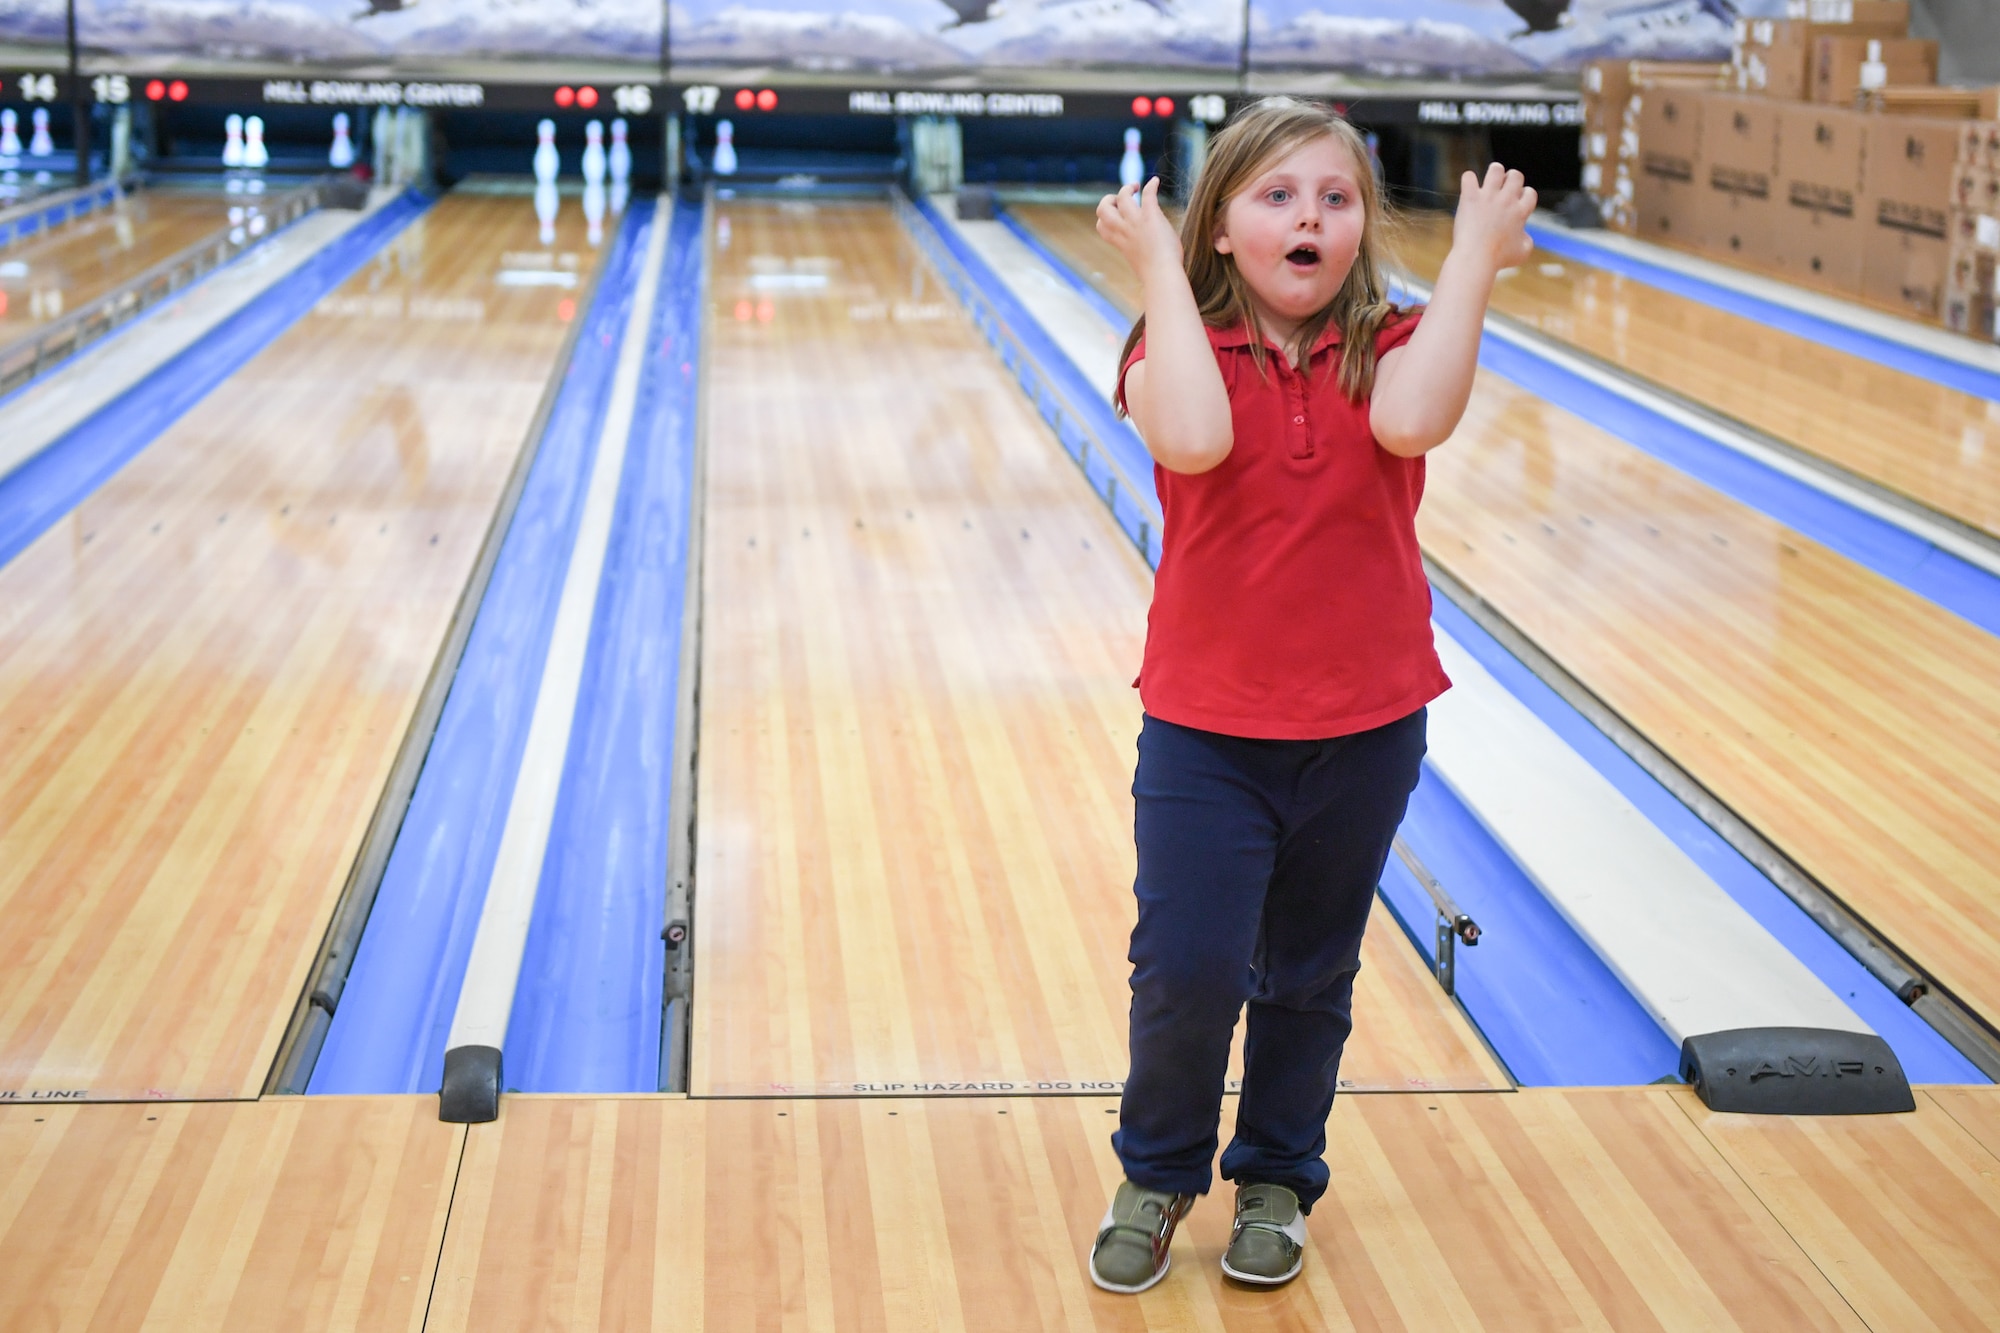 Ambria Myers during bowling Jan. 30, 2019, at the event held by Exceptional Family Member Program-Family Support at Hill Air Force Base, Utah. (U.S. Air Force photo by Cynthia Griggs)